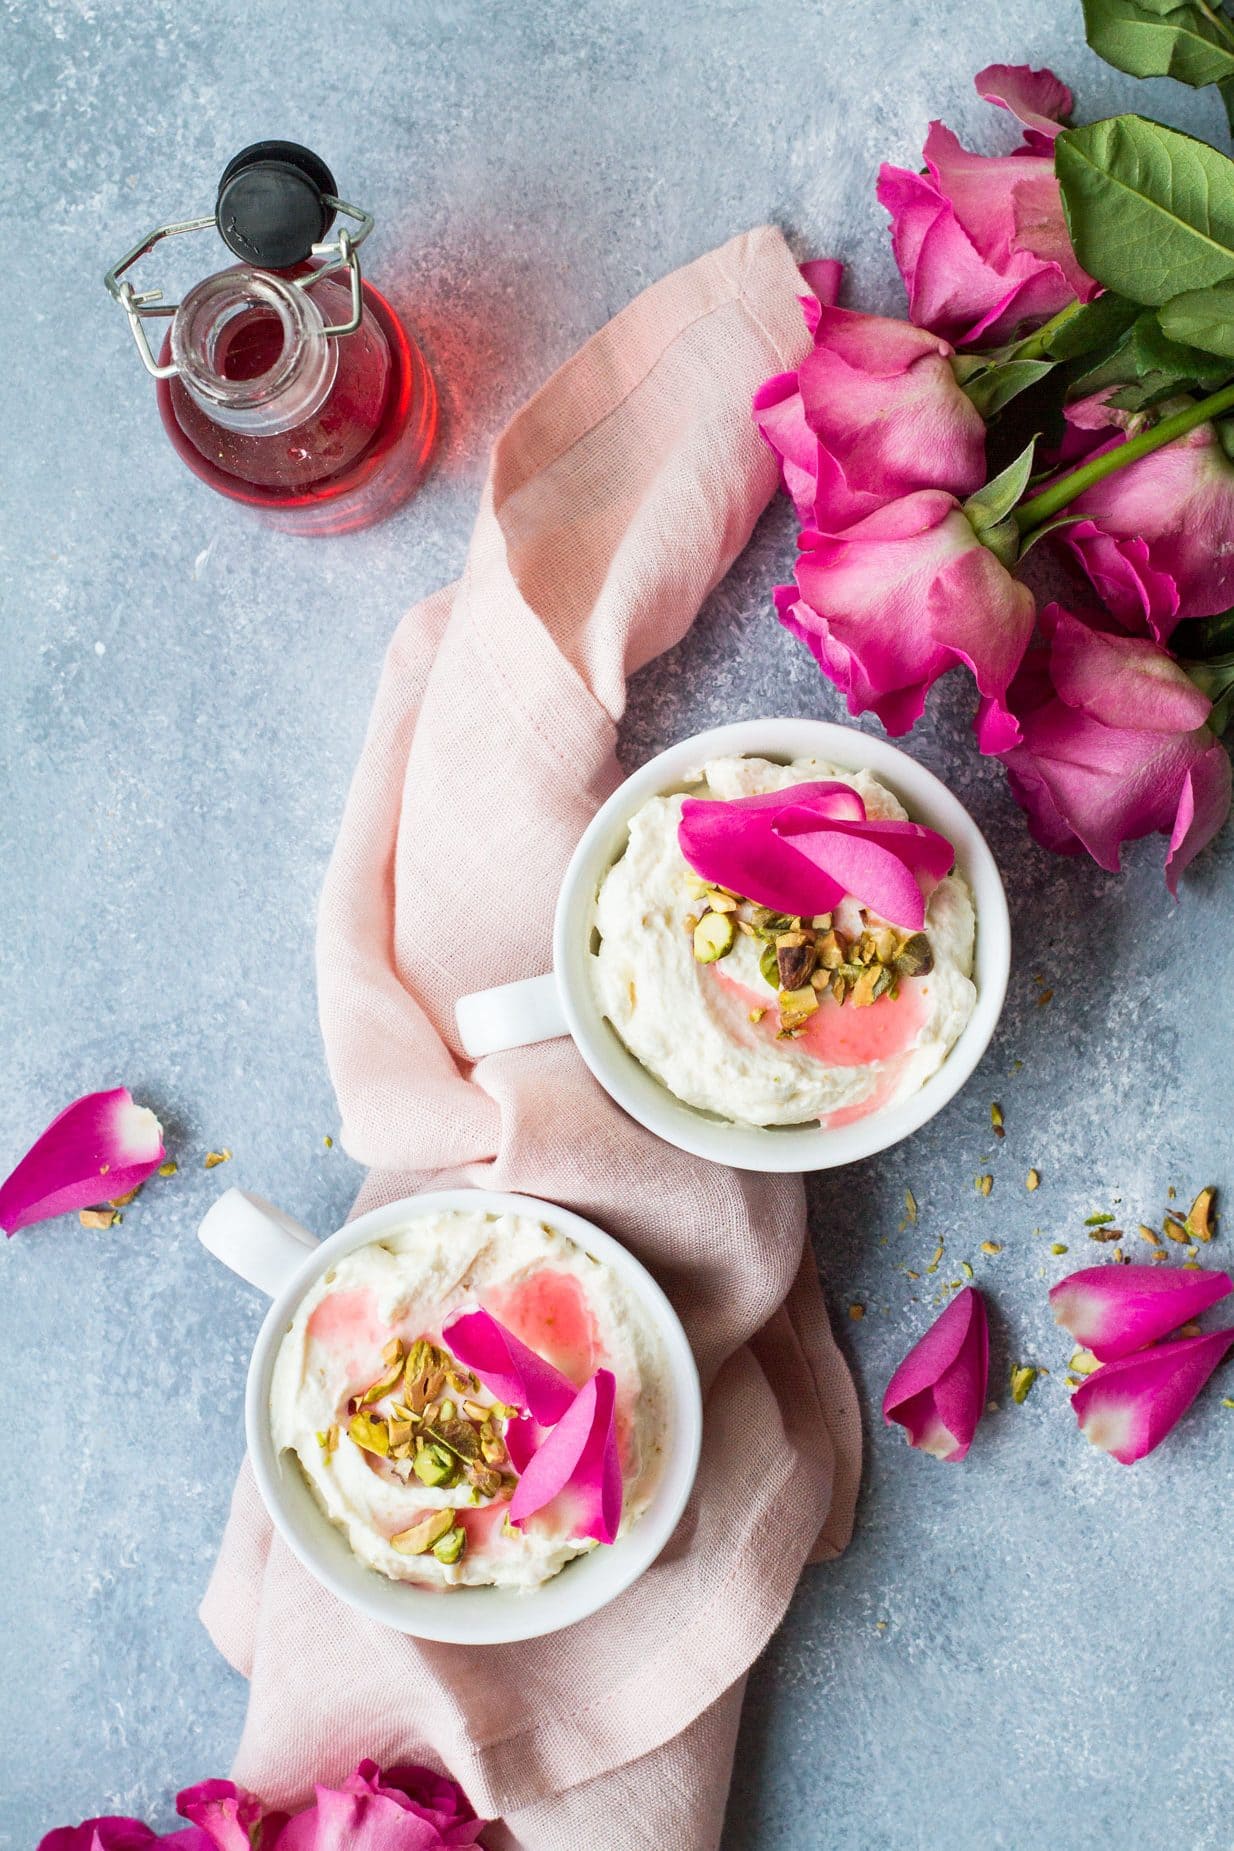 Bird's eye view of two white cups with mousse, chopped pistachios and pink rose petals. Rose petals around the blue table, pink cloth.